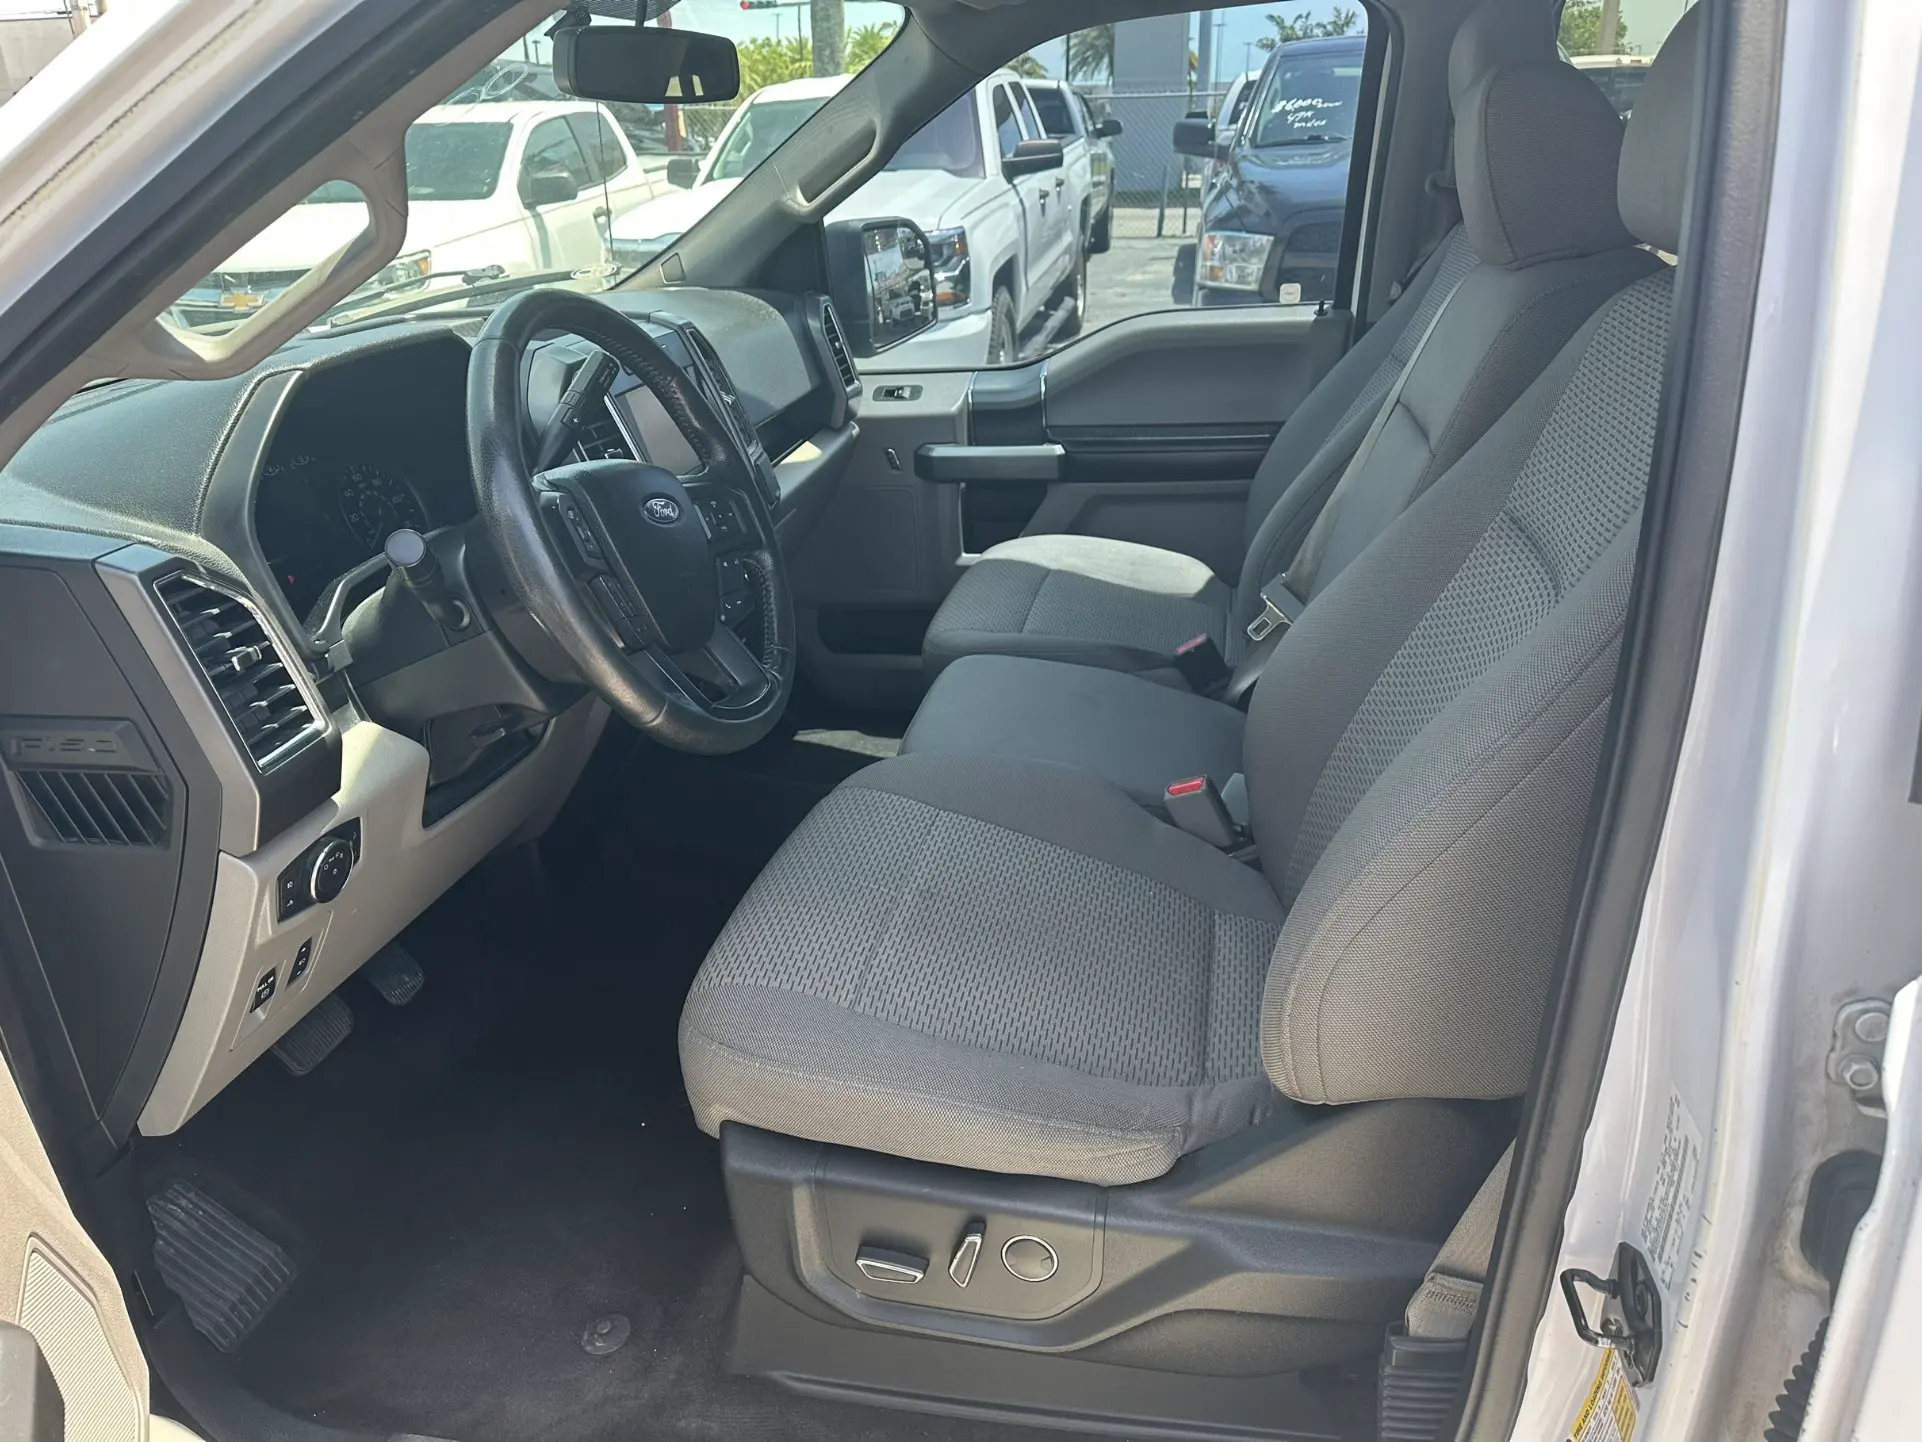 used 2015 Ford F-150 - interior view 1